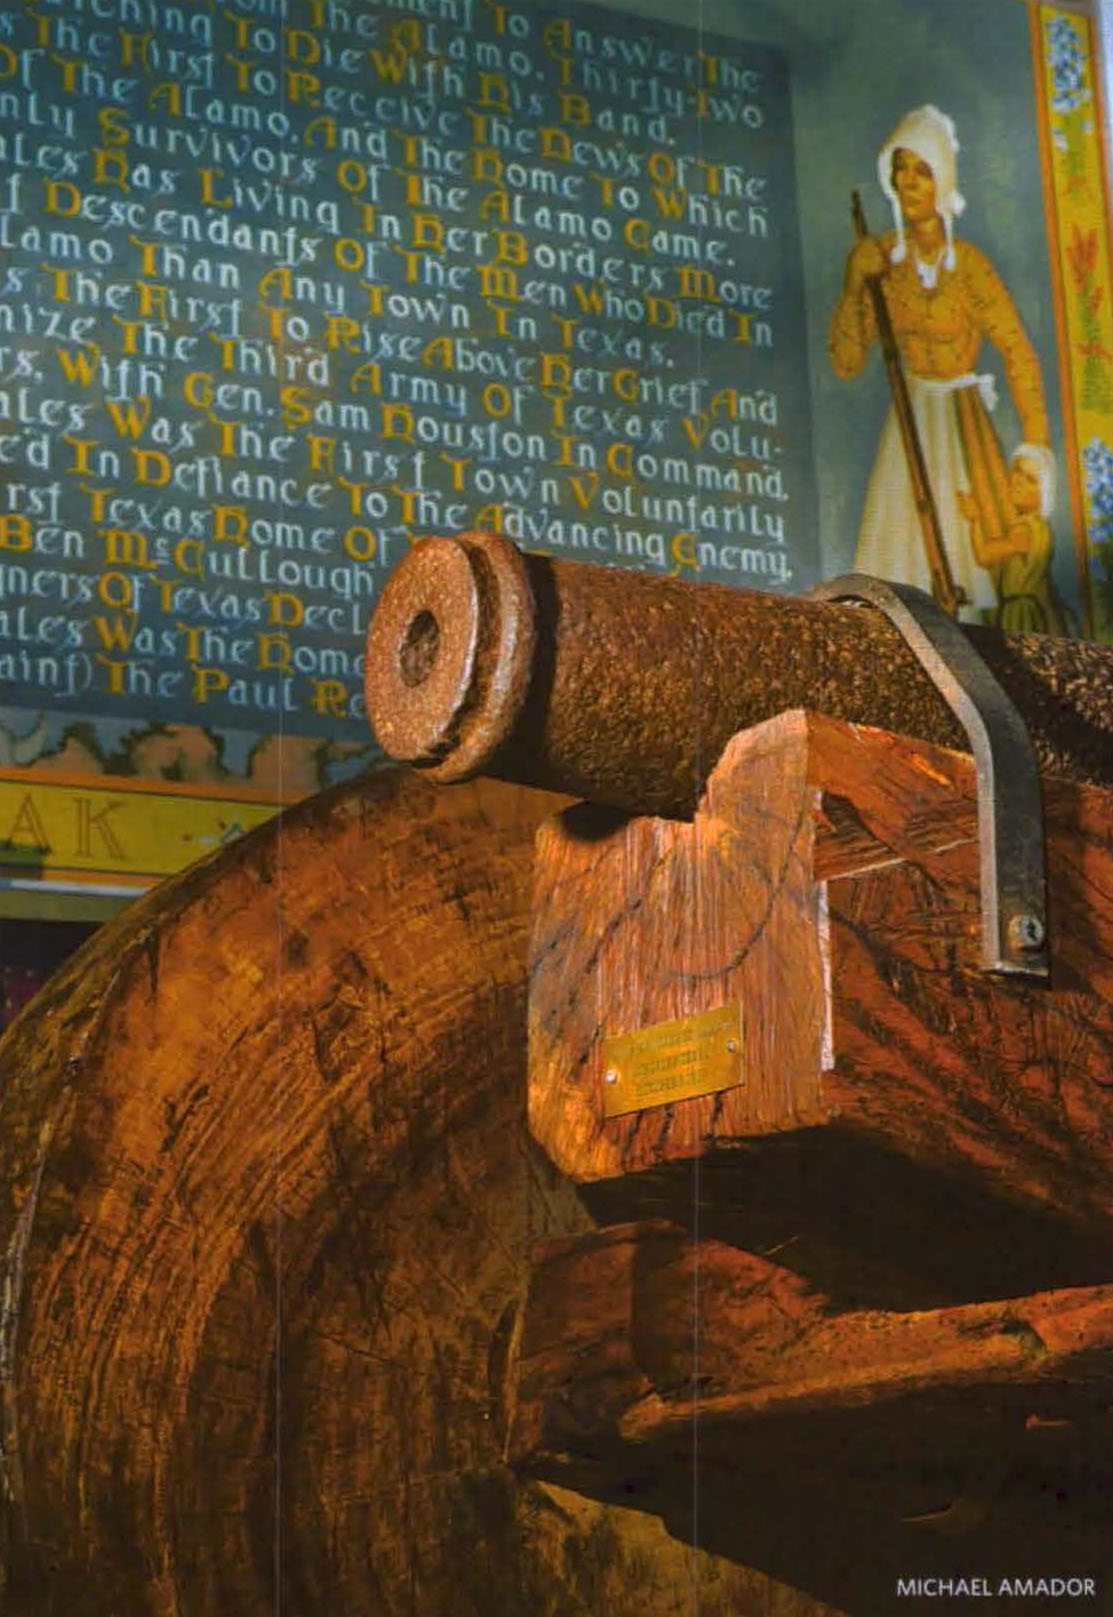 A wooden cannon